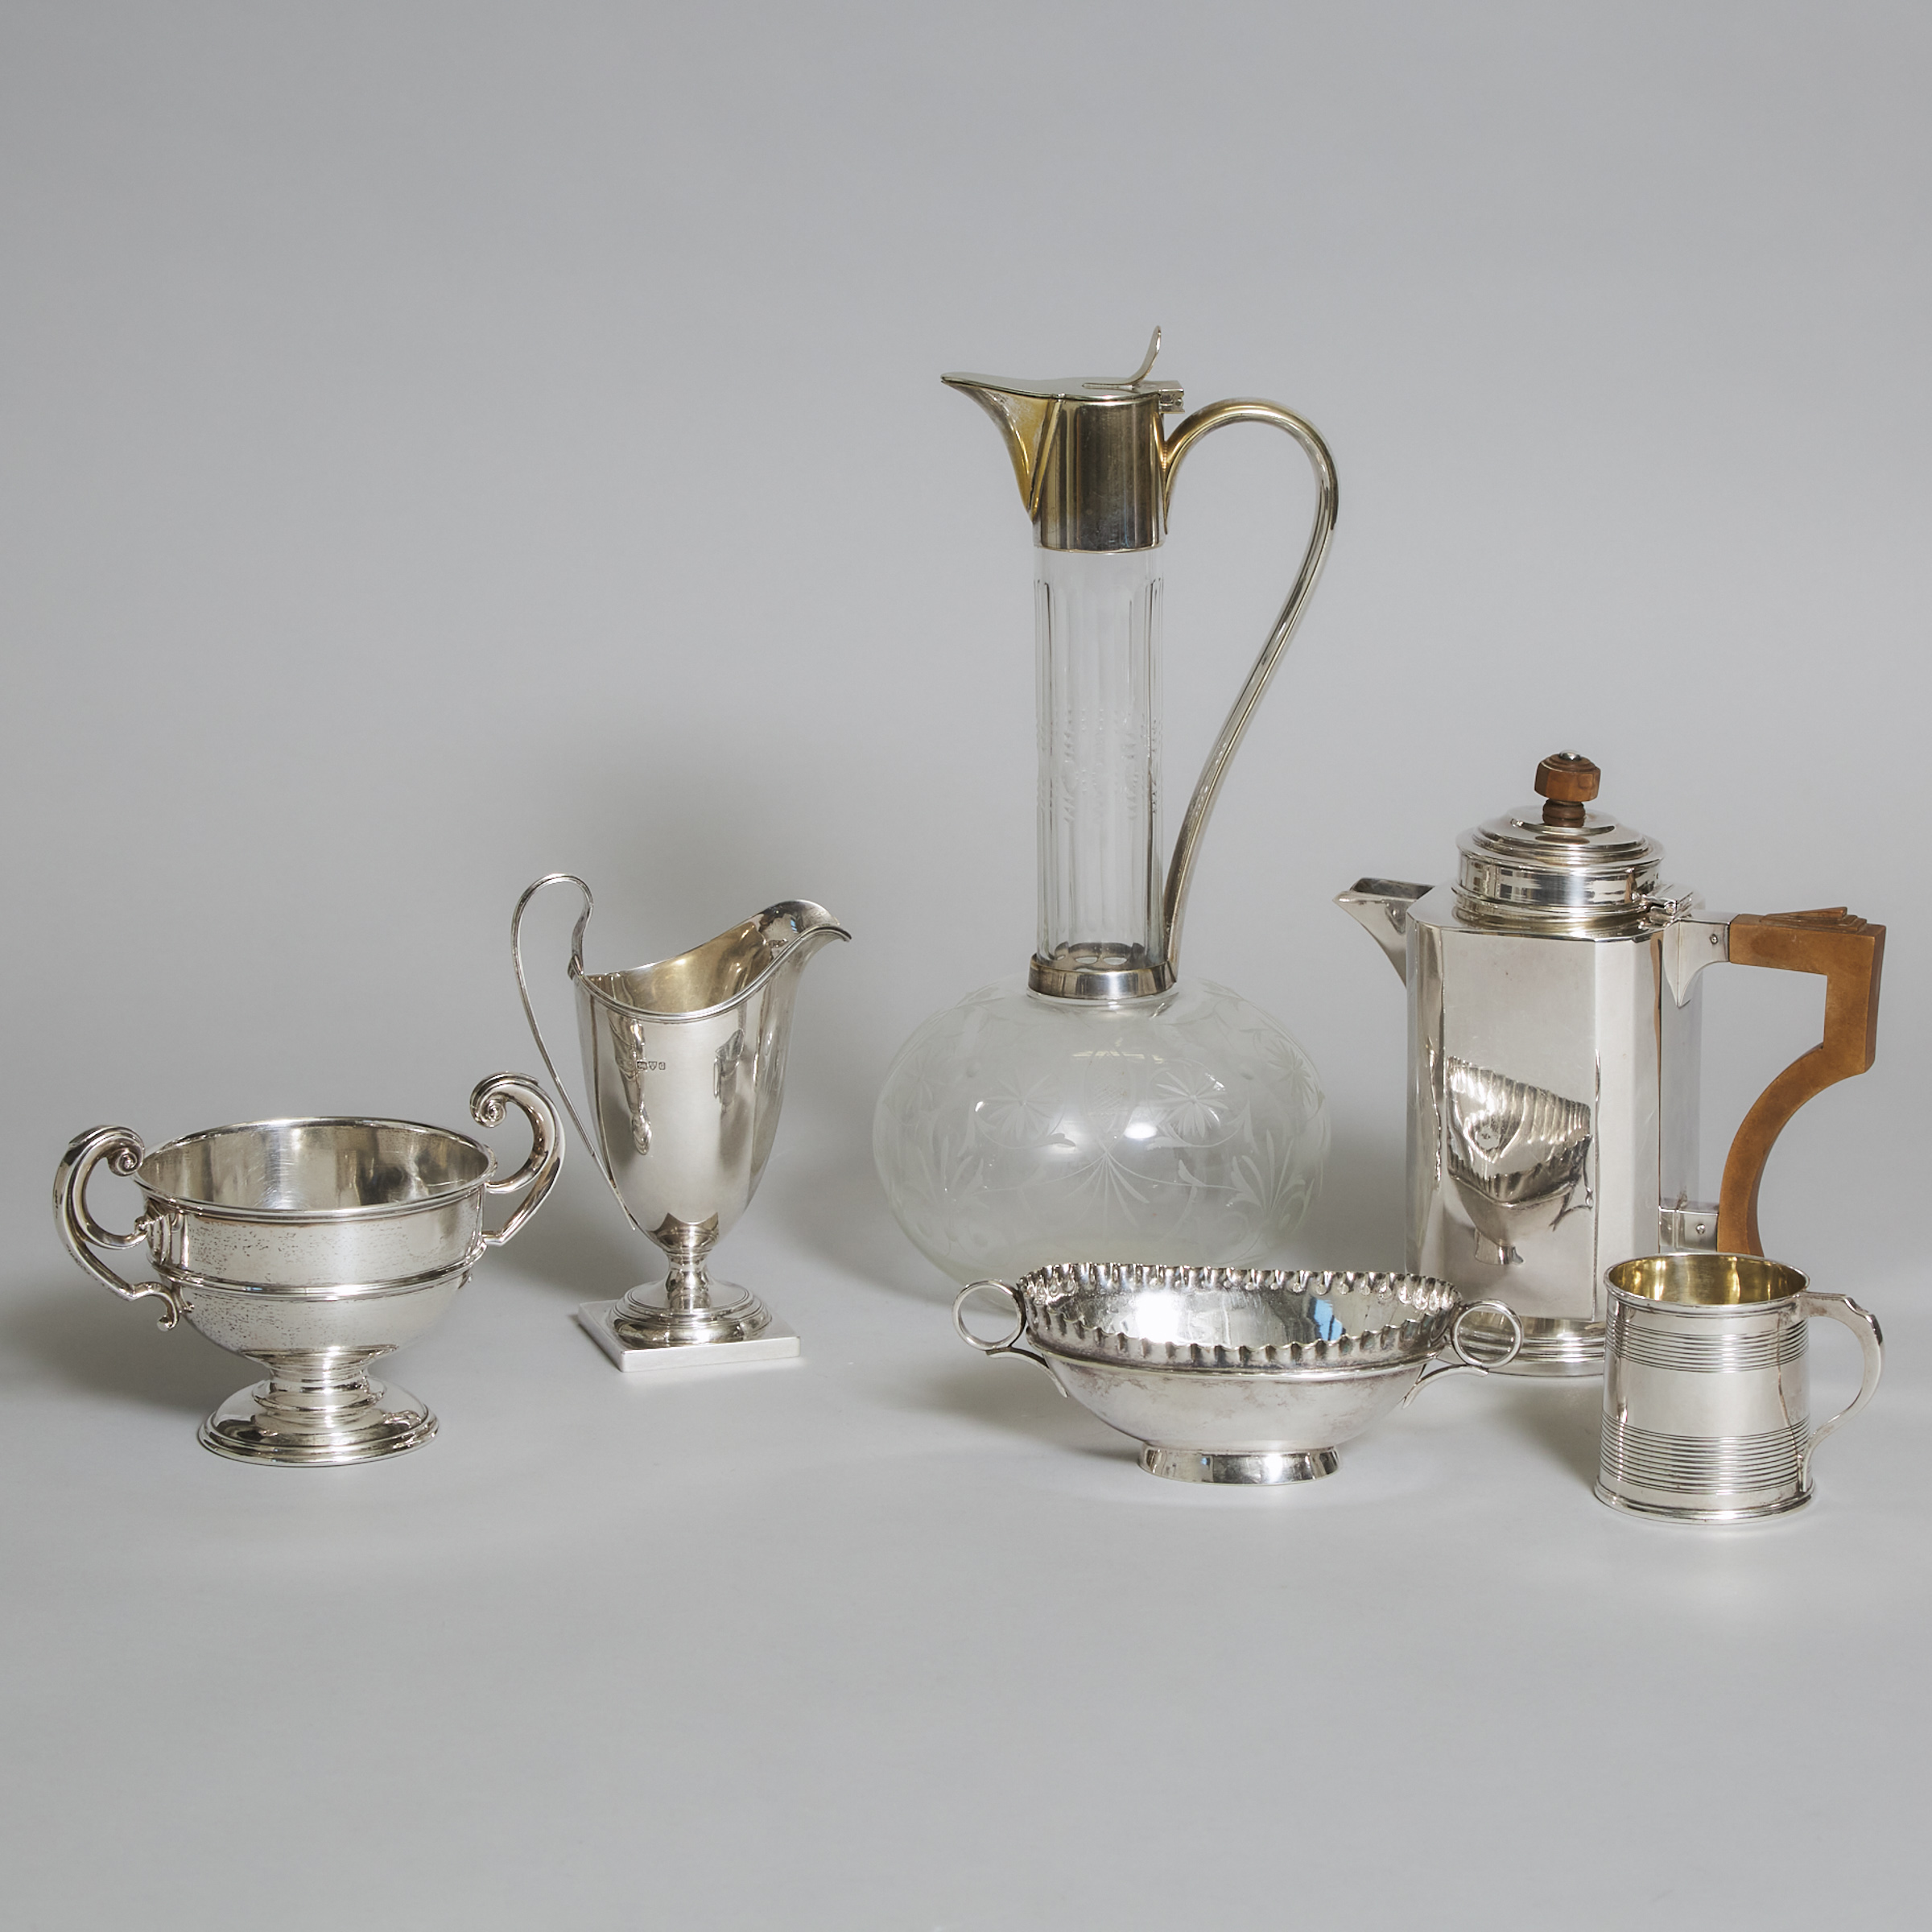 Group of Victorian and Later English Silver, 19th/20th century